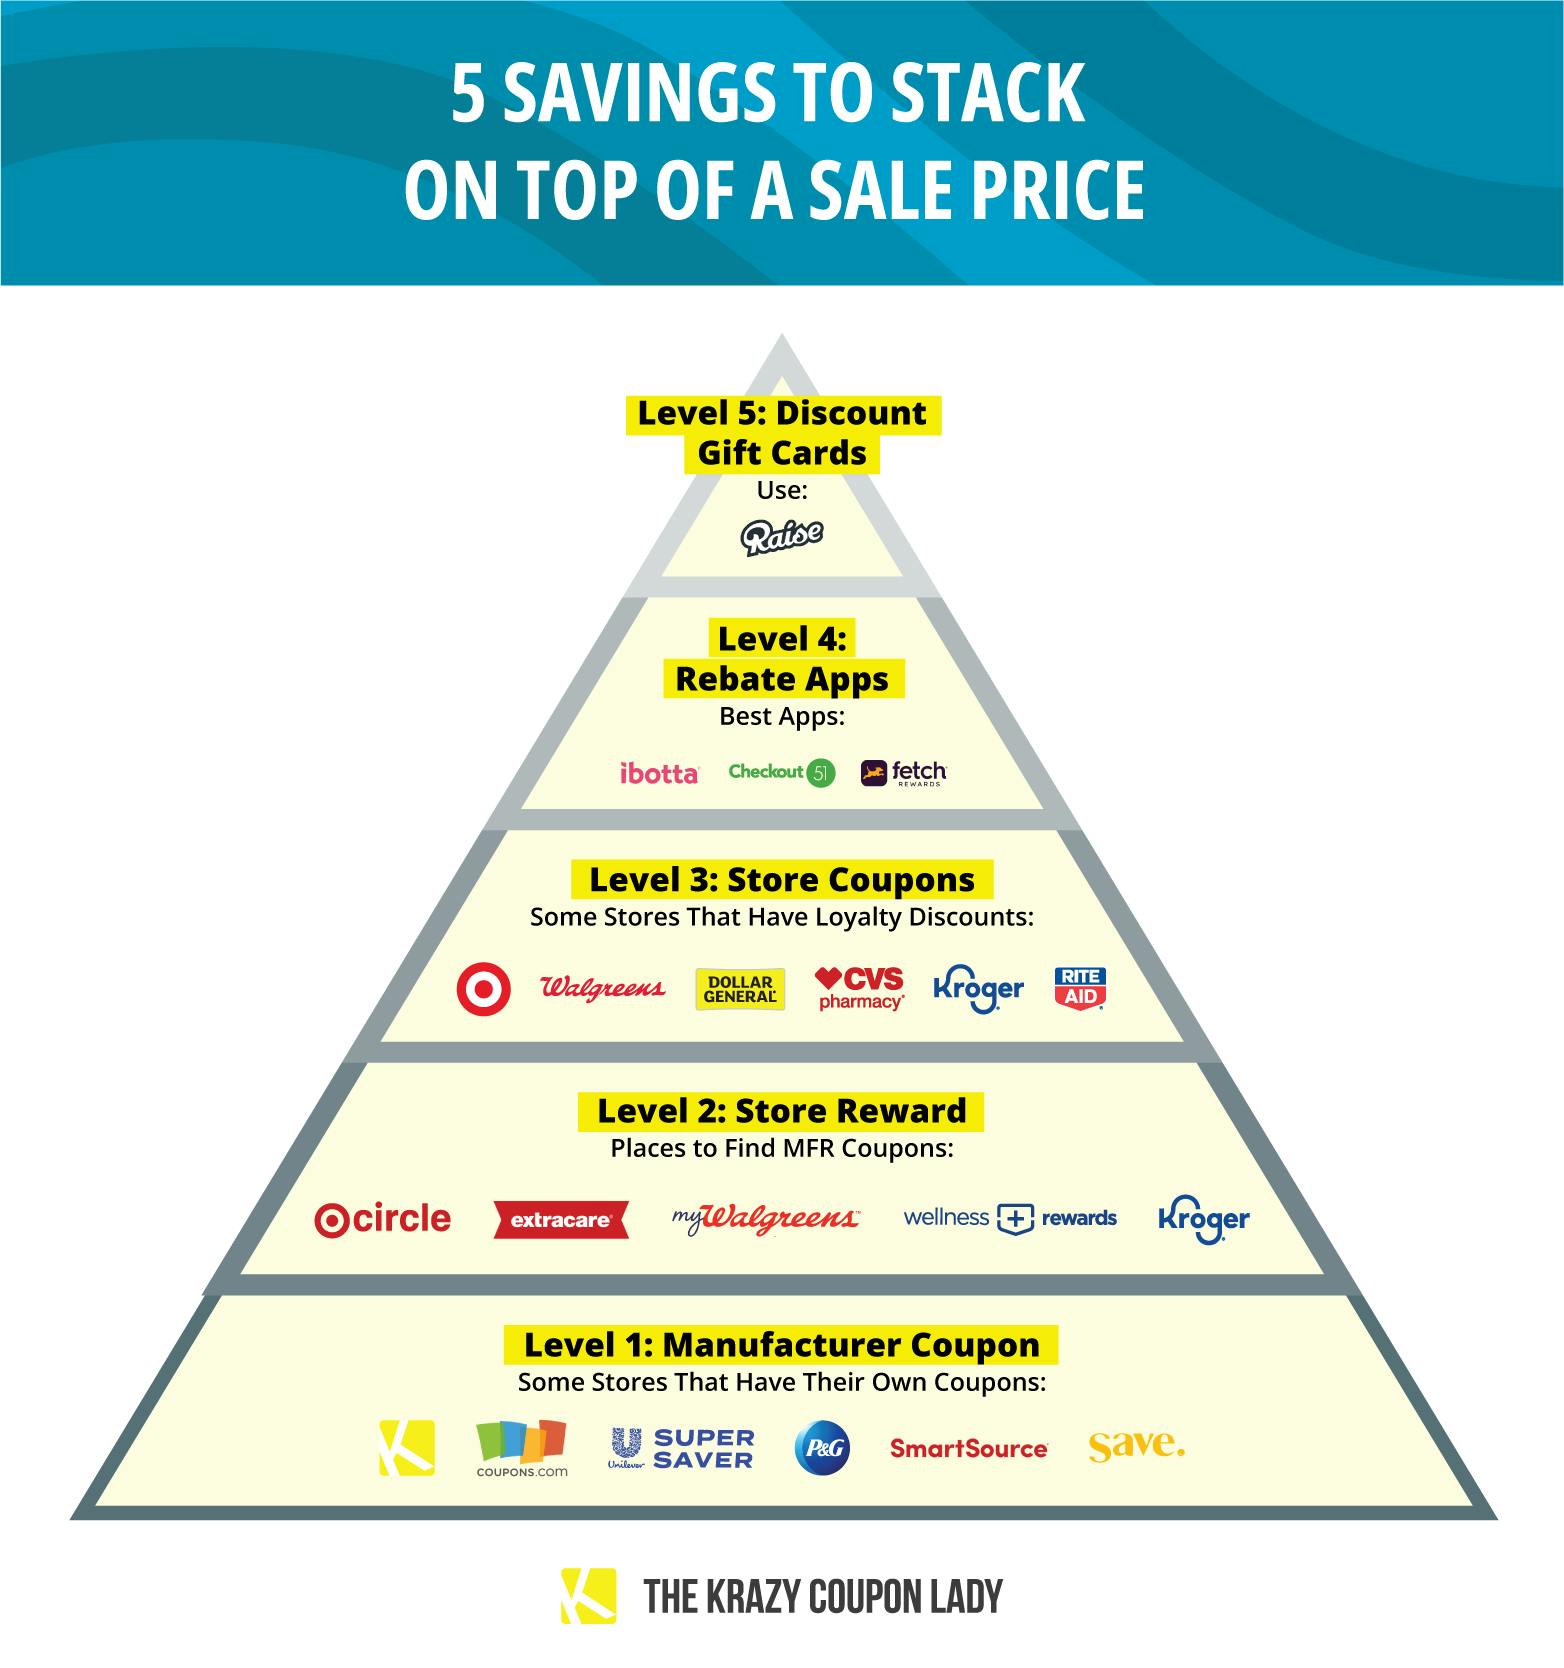 A graphic showing the layers of savings that can be stacked